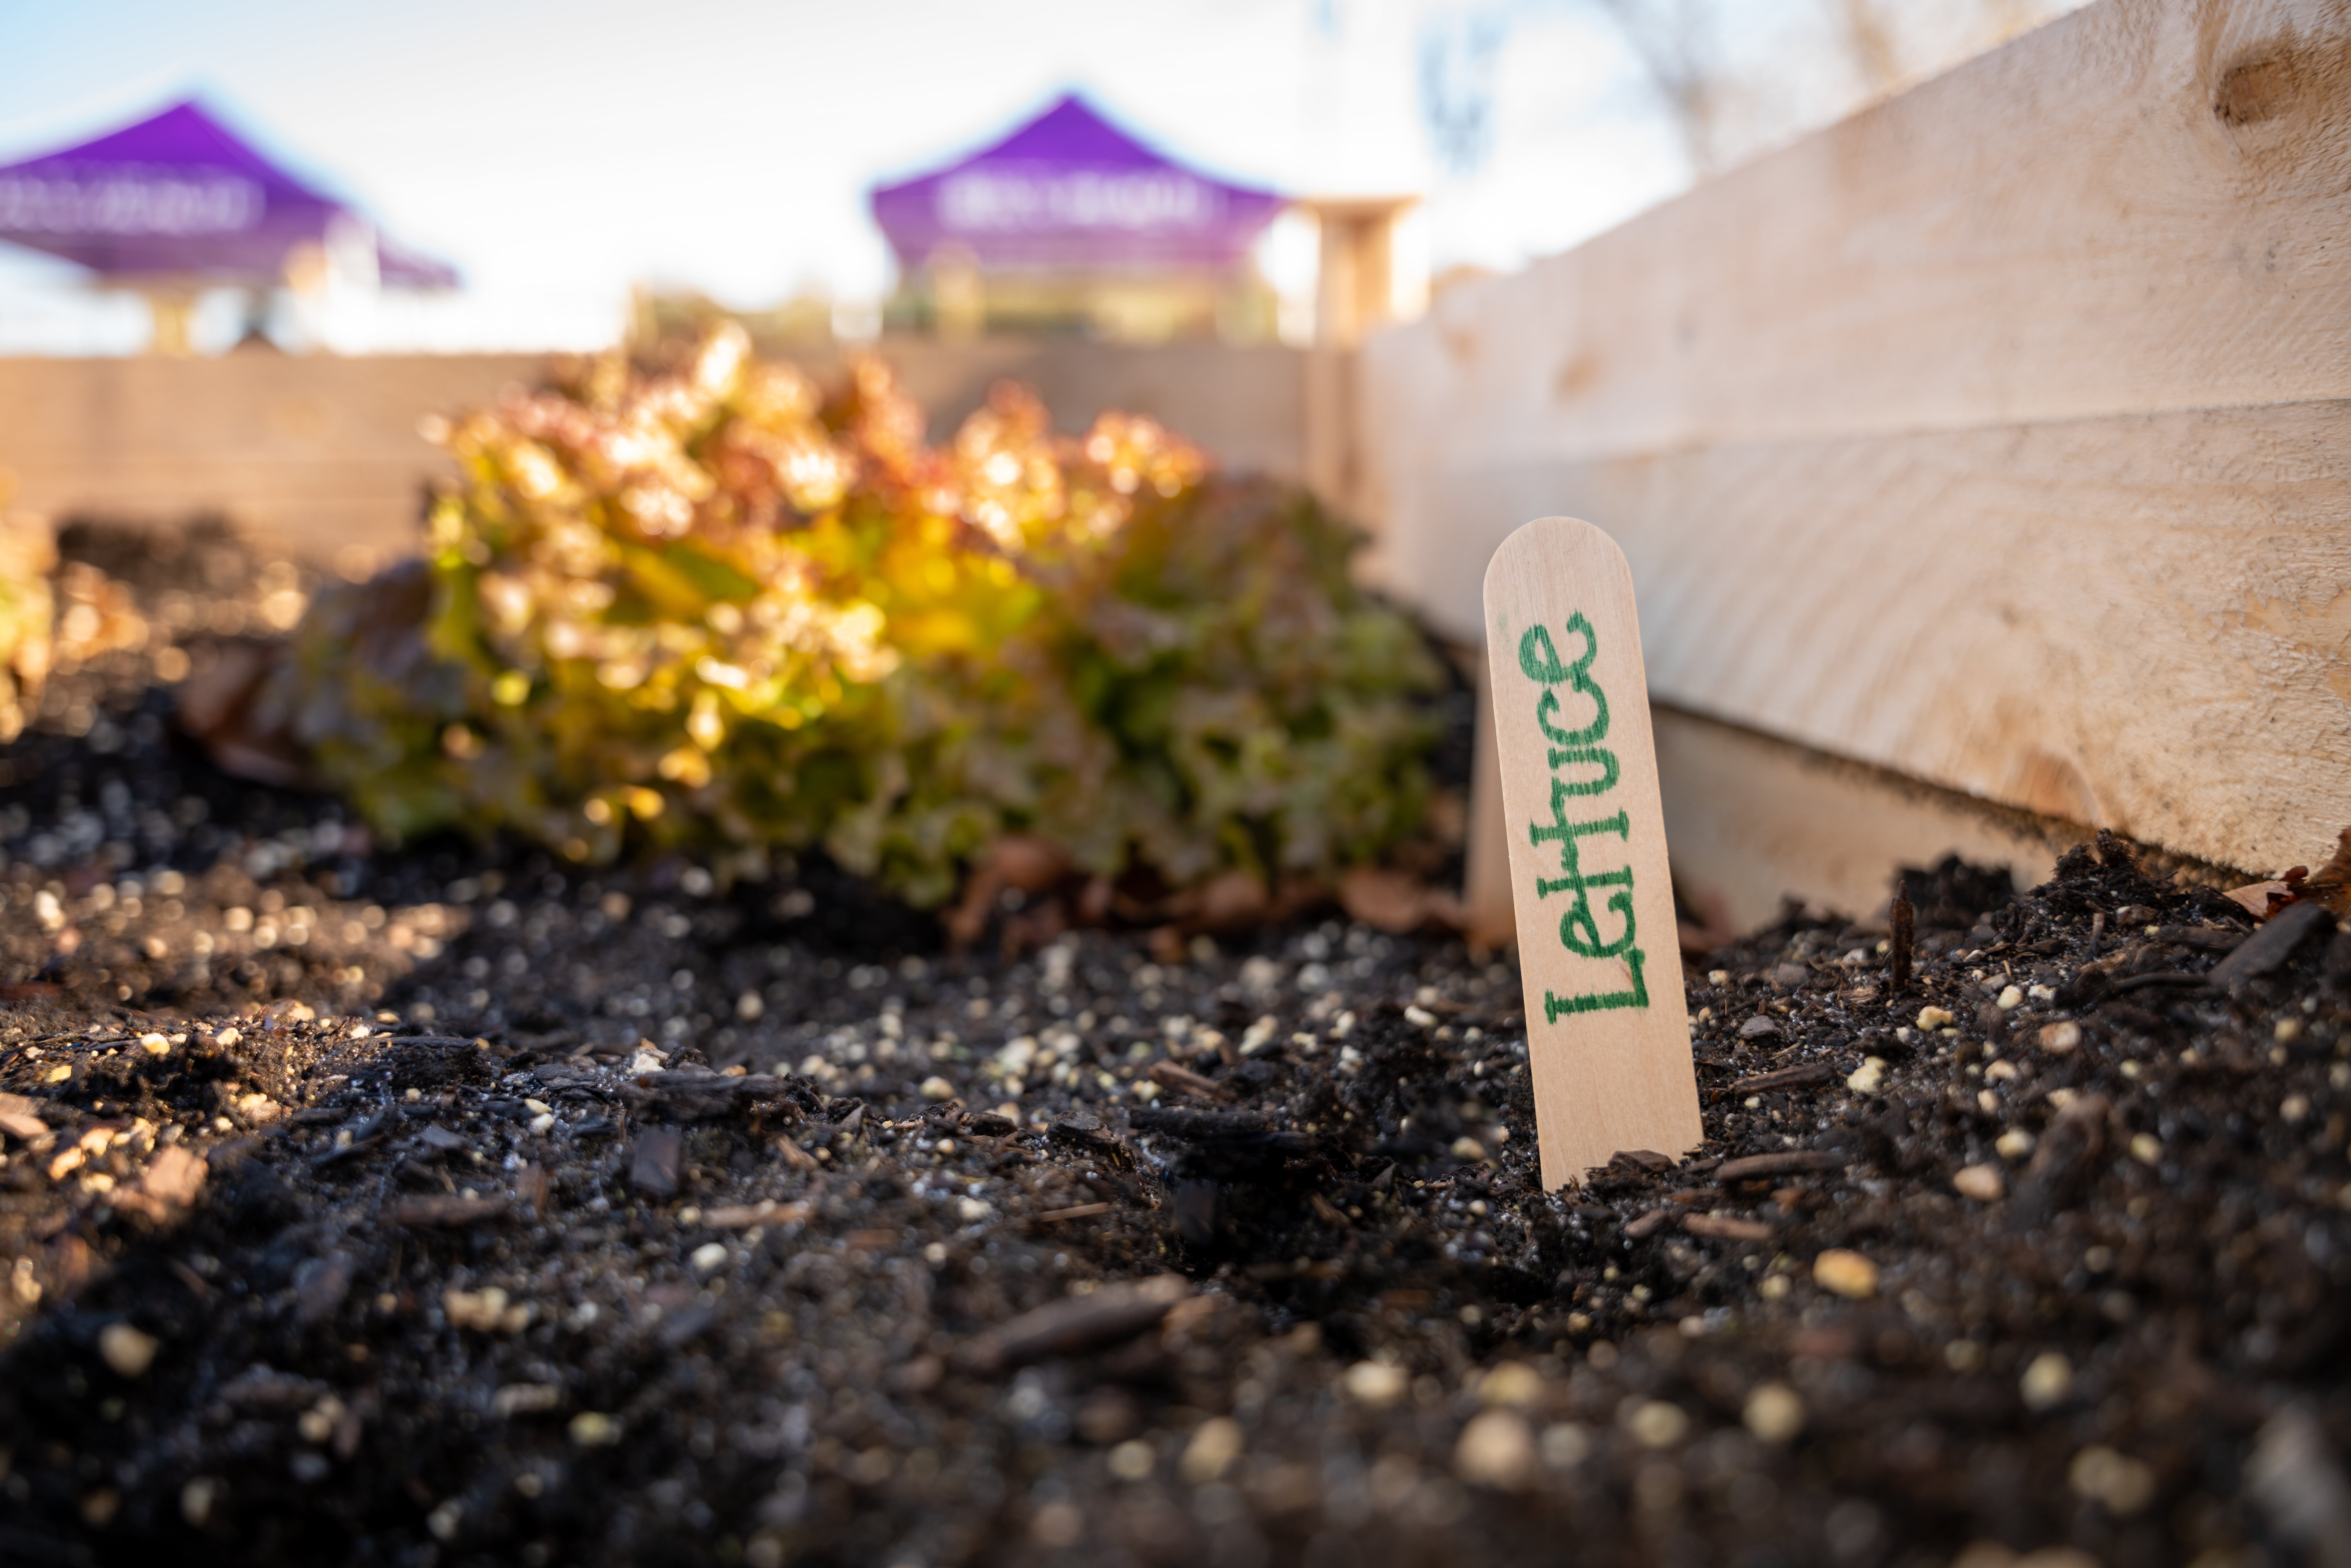 A popsicle stick is shown in dirt with "lettuce" written on it, indicating that lettuce is growing in the garden.